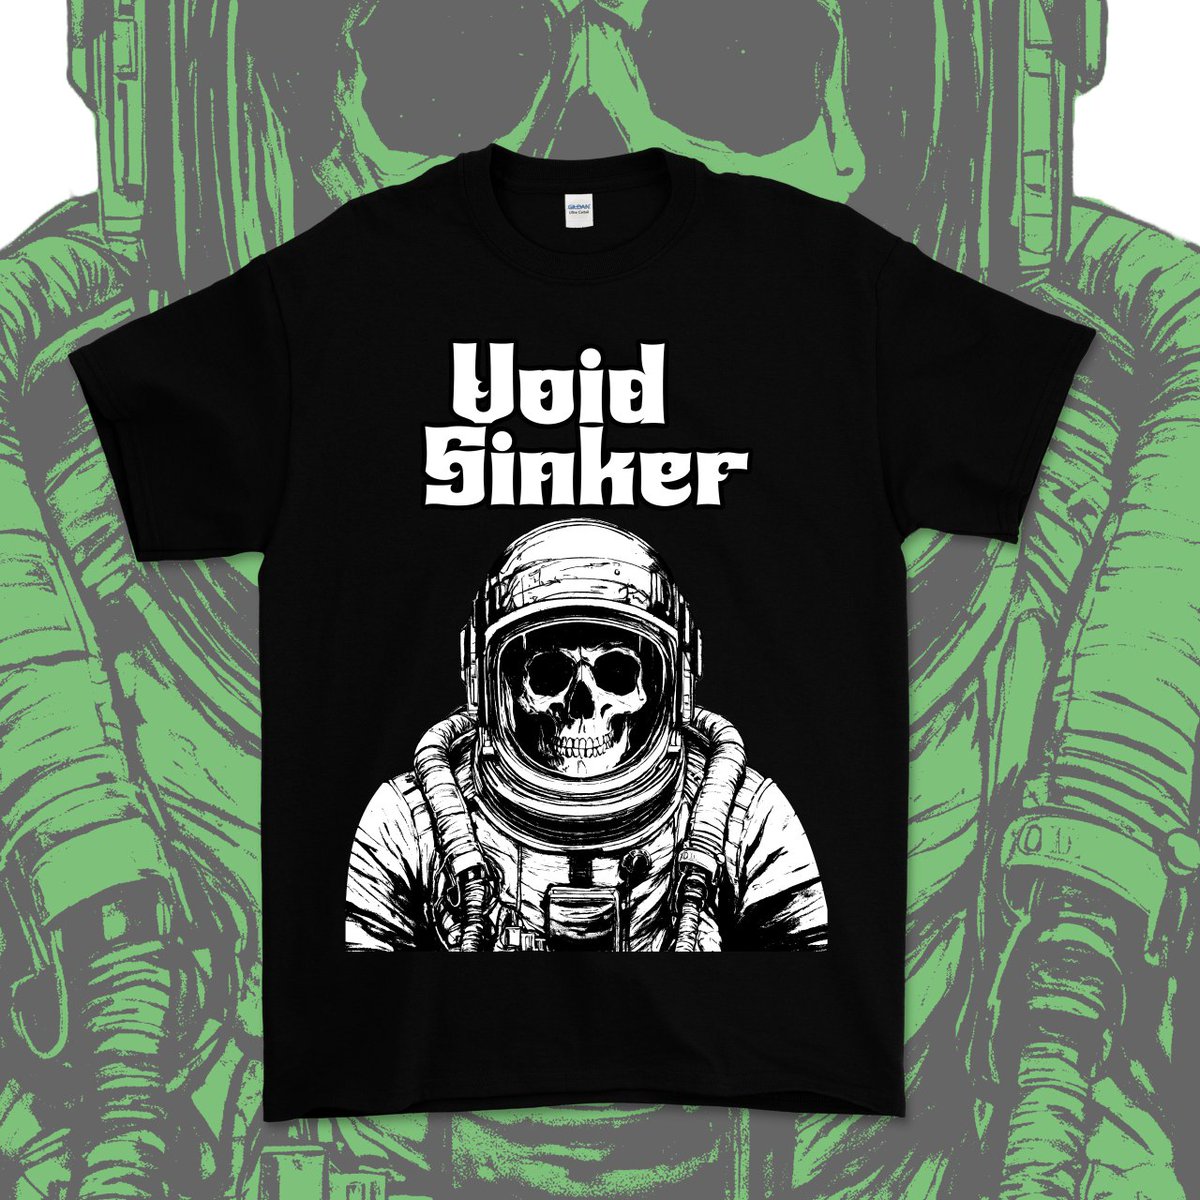 Did someone say merch? 💀
This is just a preview, t-shirt and other merch will be available on the official Void Sinker Bandcamp page in a limited number in the future, stay tuned to grab one! 💀
#voidsinker #merchandising #artwork  #preview #comingsoon #staytuned